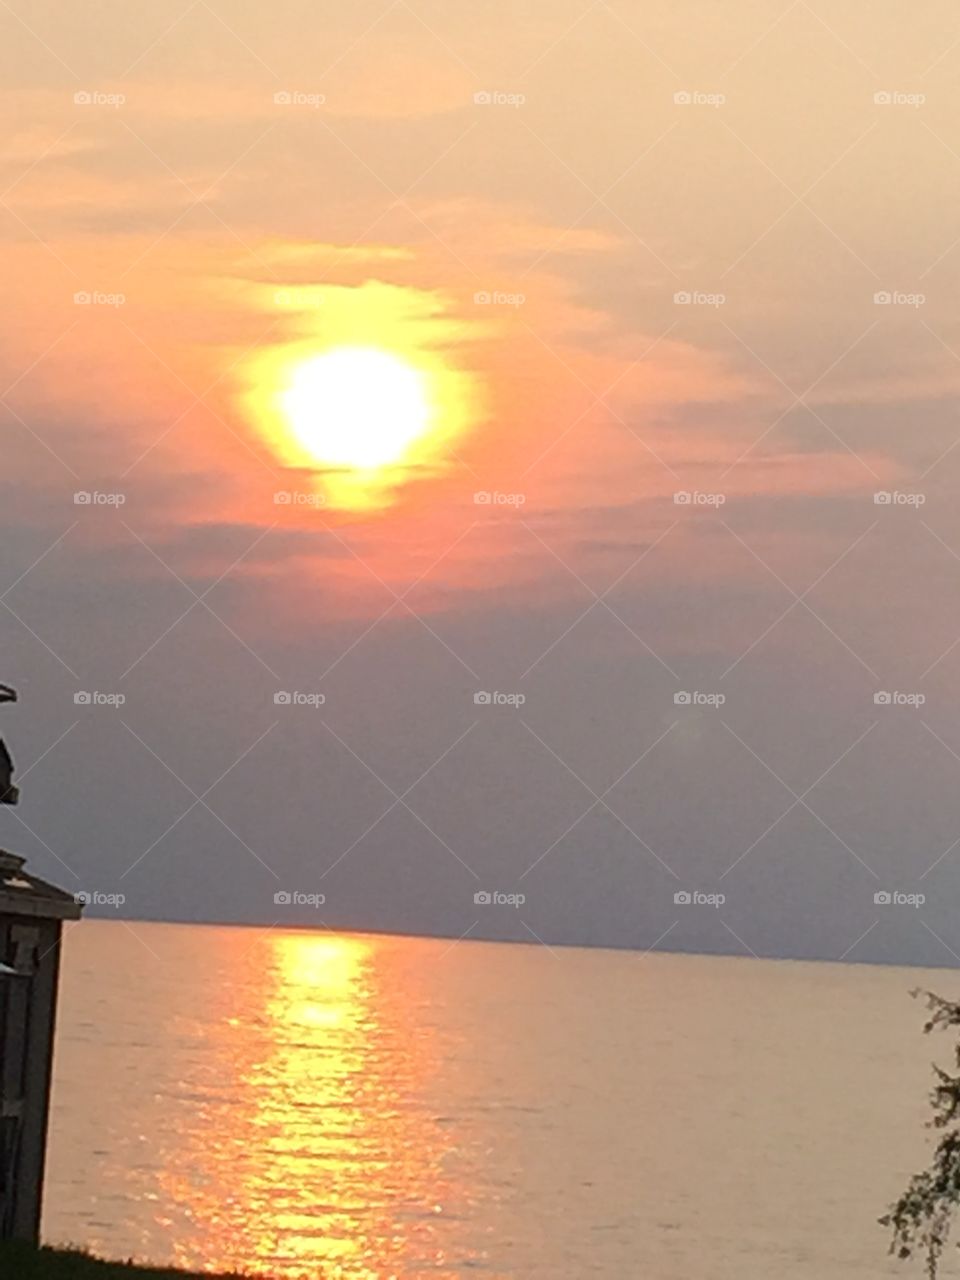 Sun Setting over Lake Erie. Taken June 2015 from the beach in Mentor, Ohio at sunset